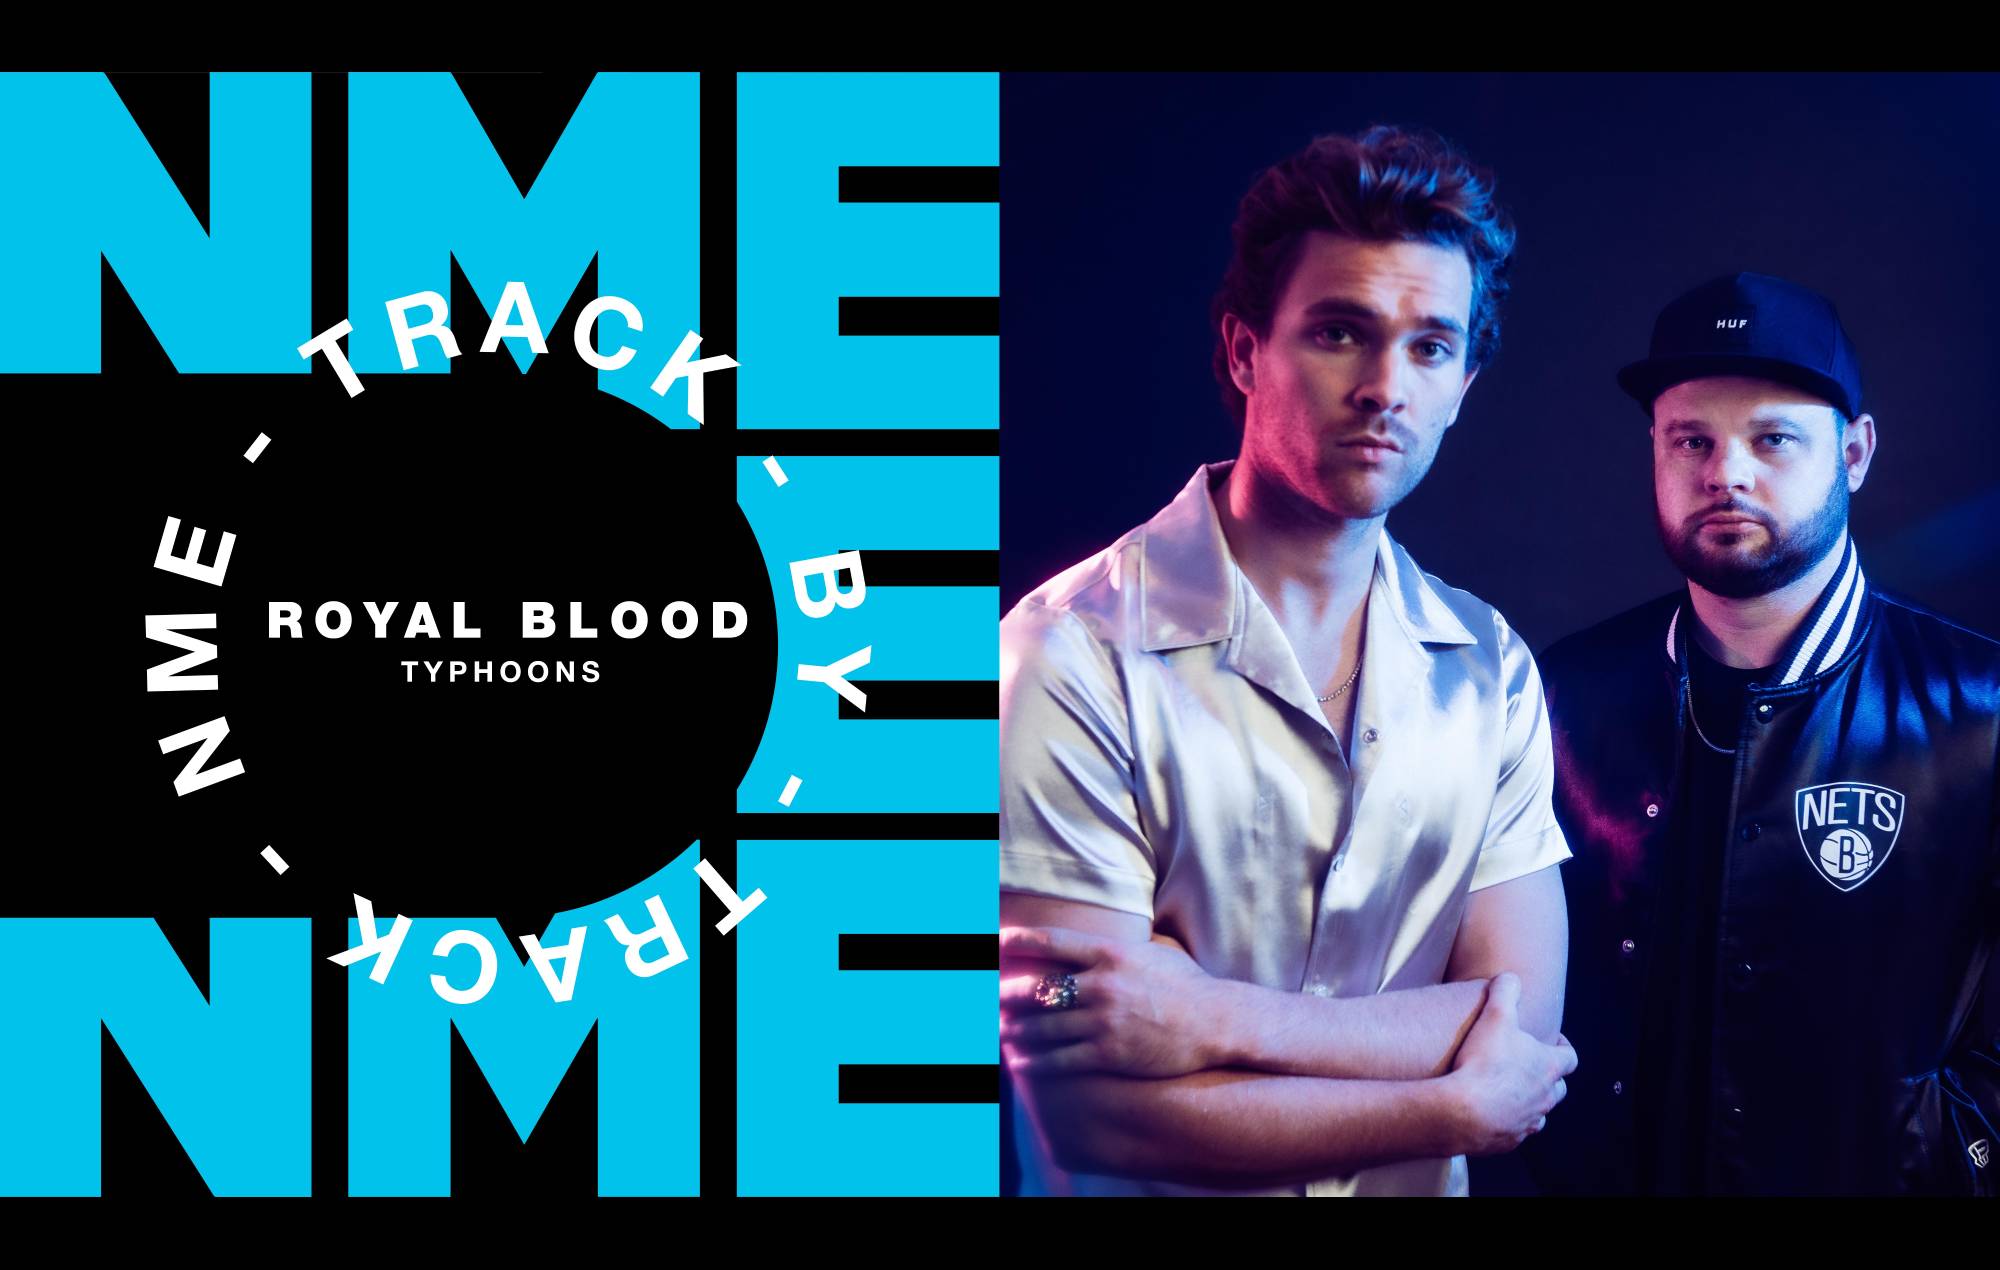 Watch Royal Blood talk us through their new album ‘Typhoons’ track-by-track